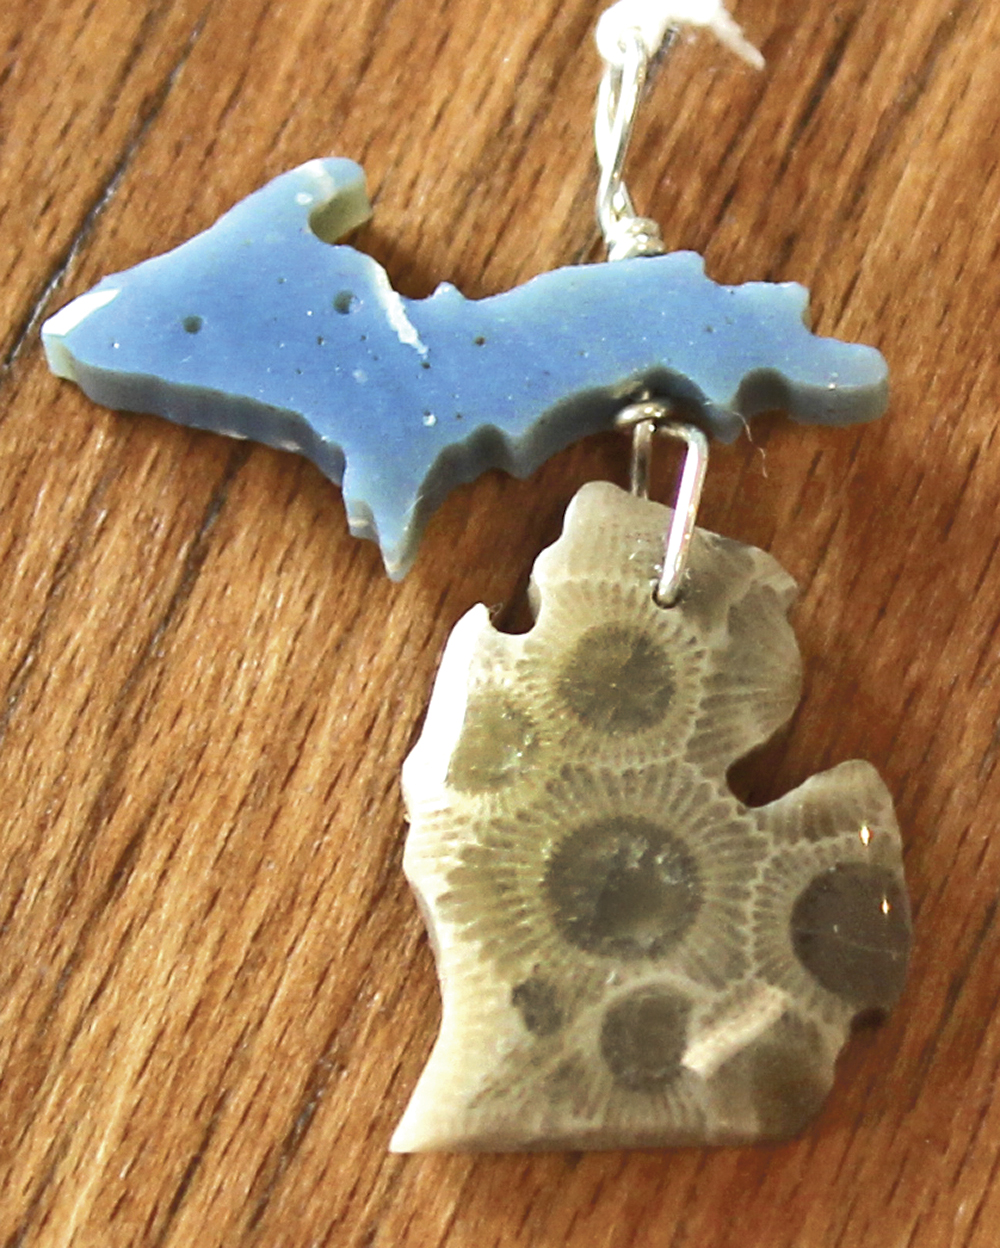 In this necklace, Michigan’s Upper Peninsula is made of Leland blue stone, Leland’s equivalent of slag. The Lower Peninsula is made of Petoskey stone. Photo by Jordan Bates.